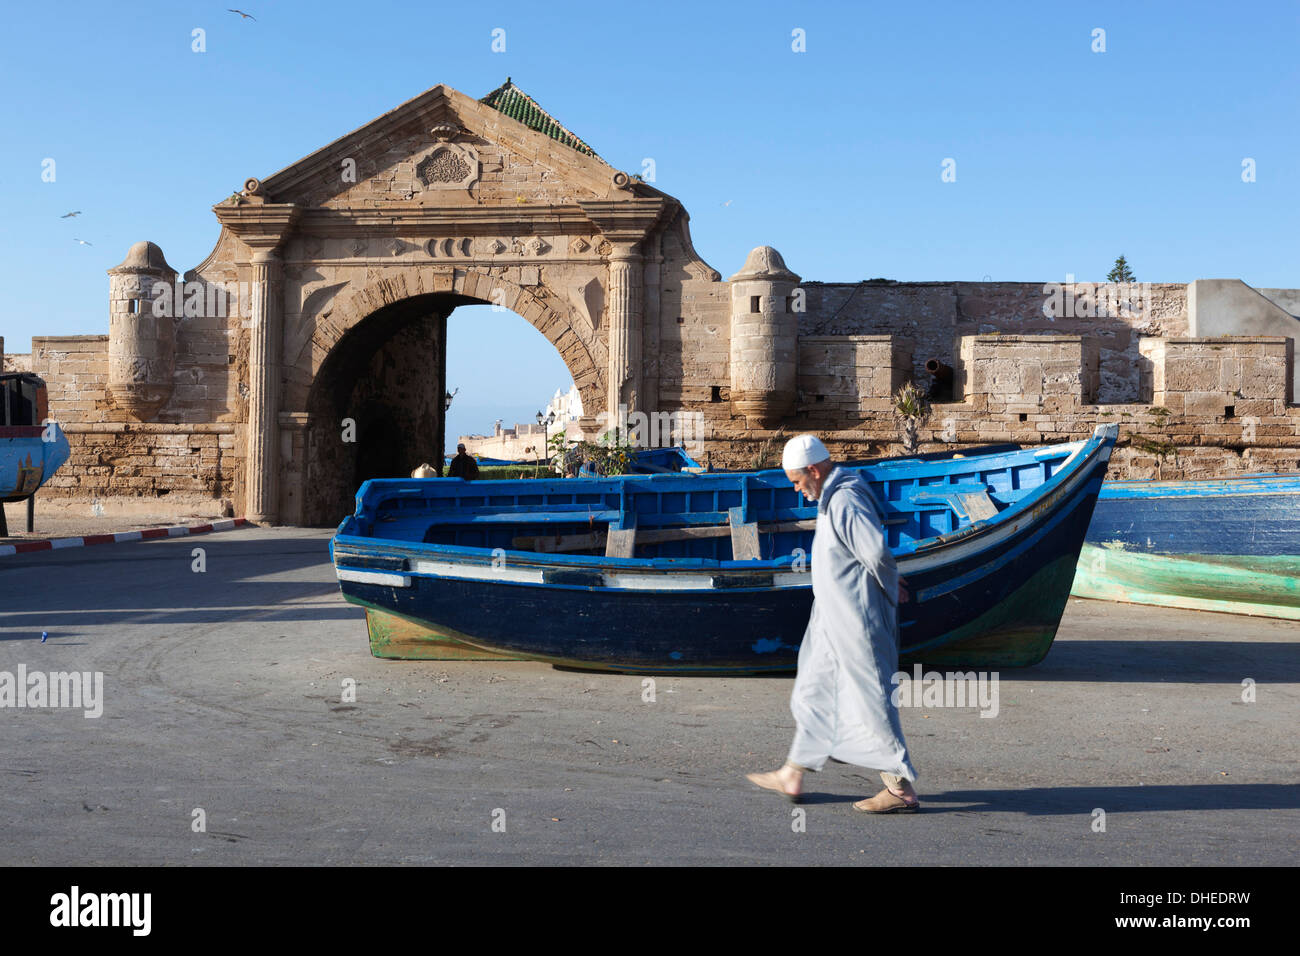 Old Muslim man walking below the old city gate and ramparts, Essaouira, Atlantic coast, Morocco, North Africa, Africa Stock Photo